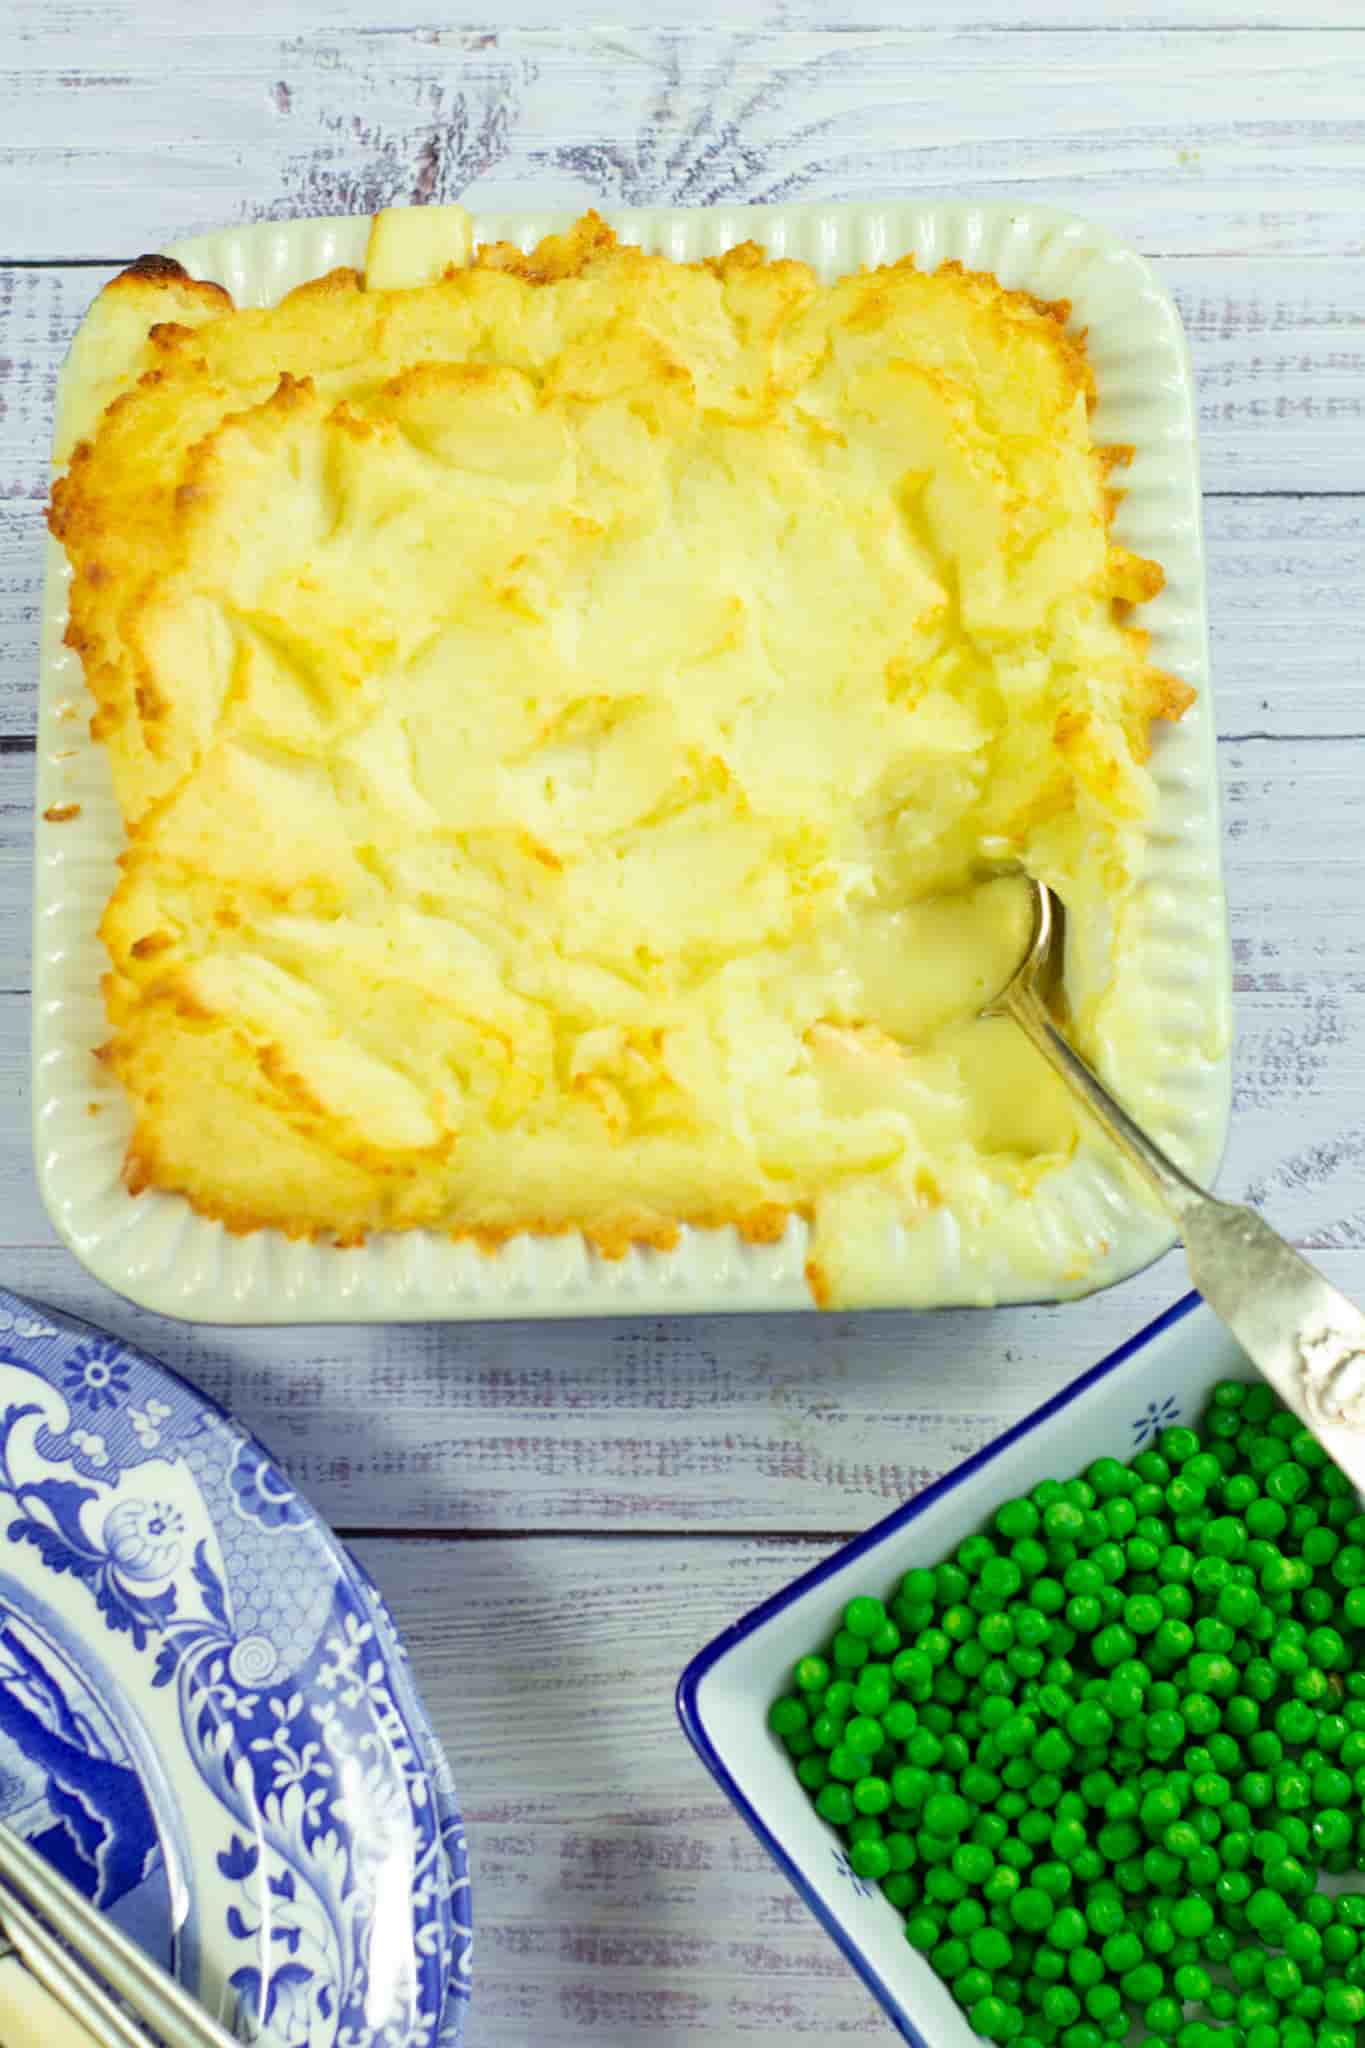 cheesy fish pie with peas to one side and blue and white plates to the other